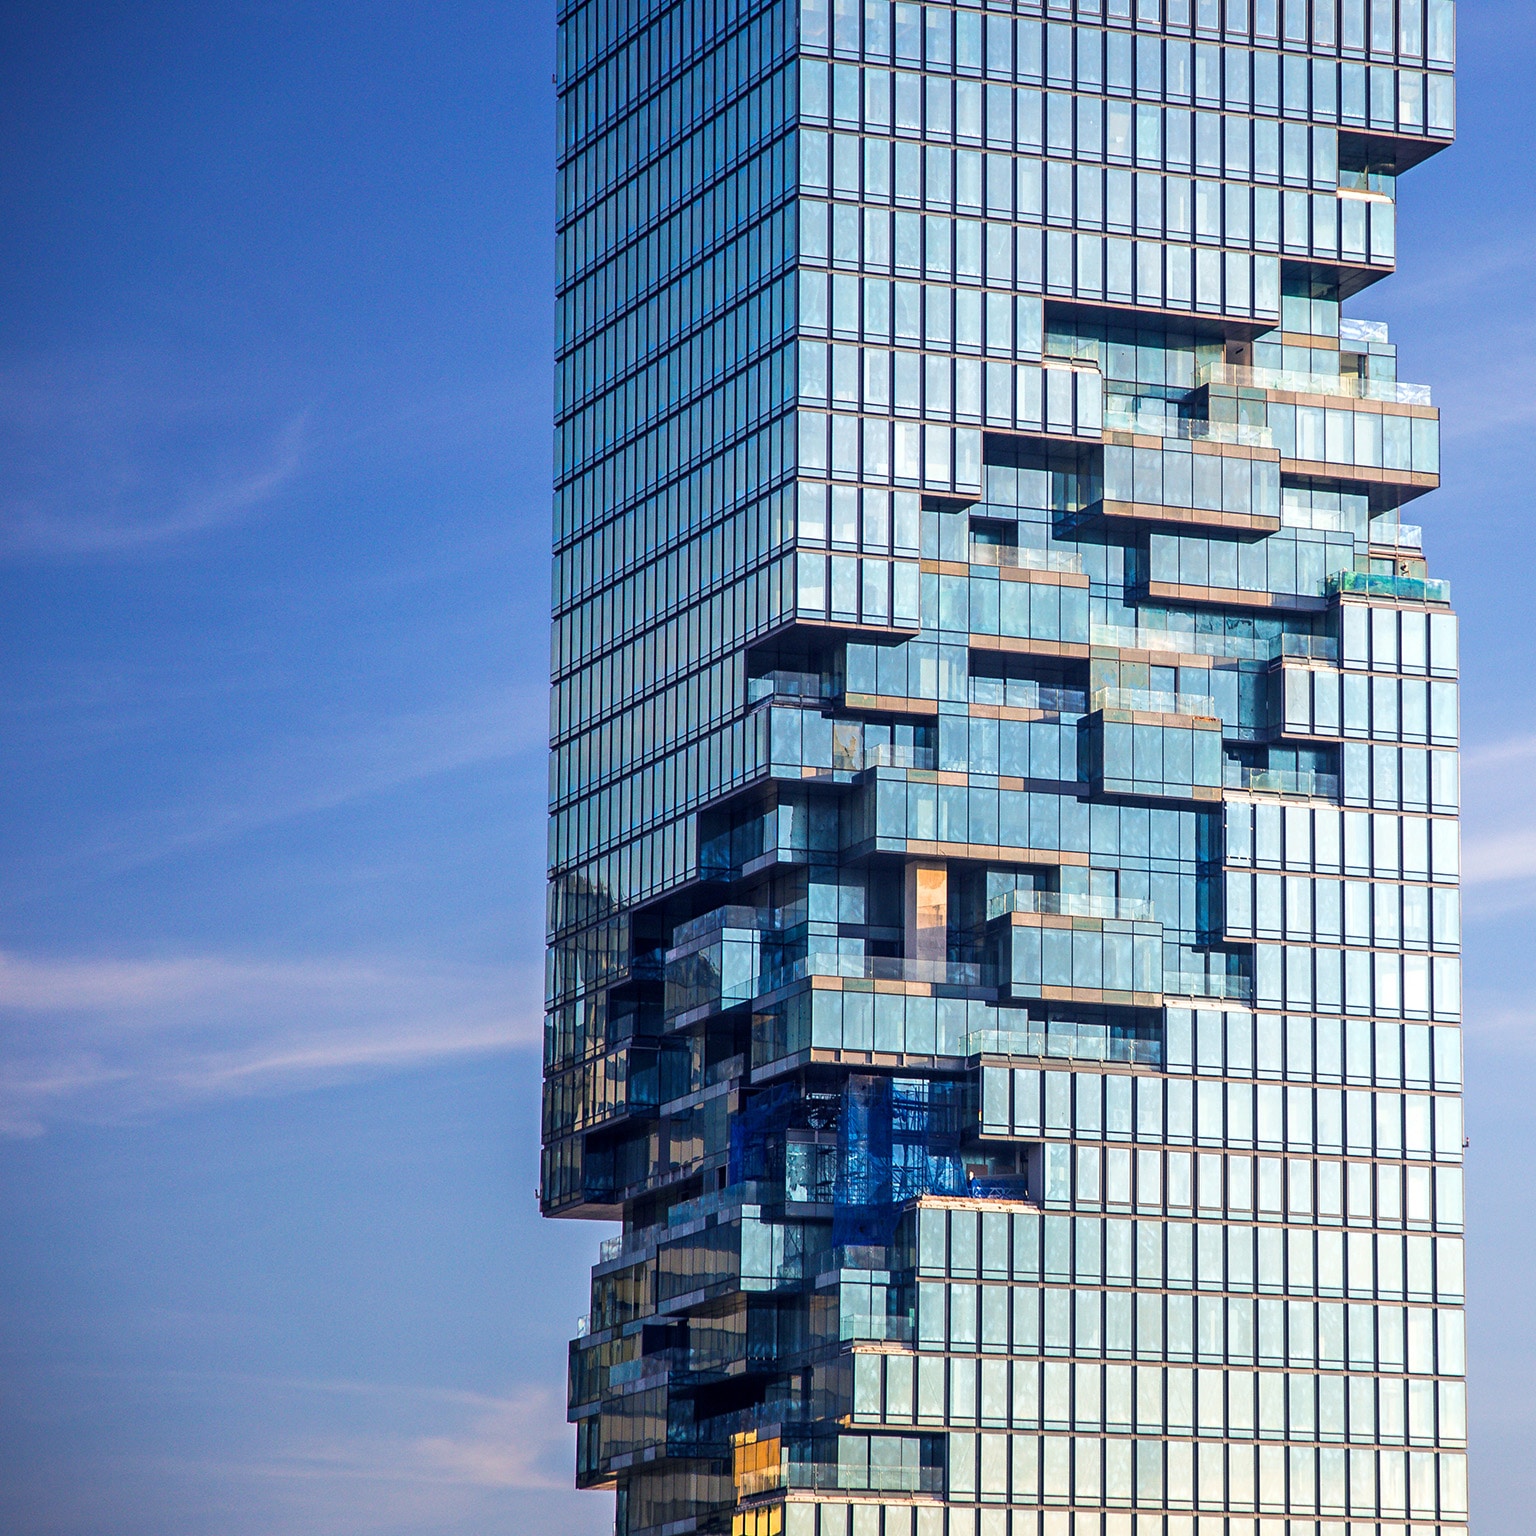 Tall building with special design showing internal glass structure in the center.